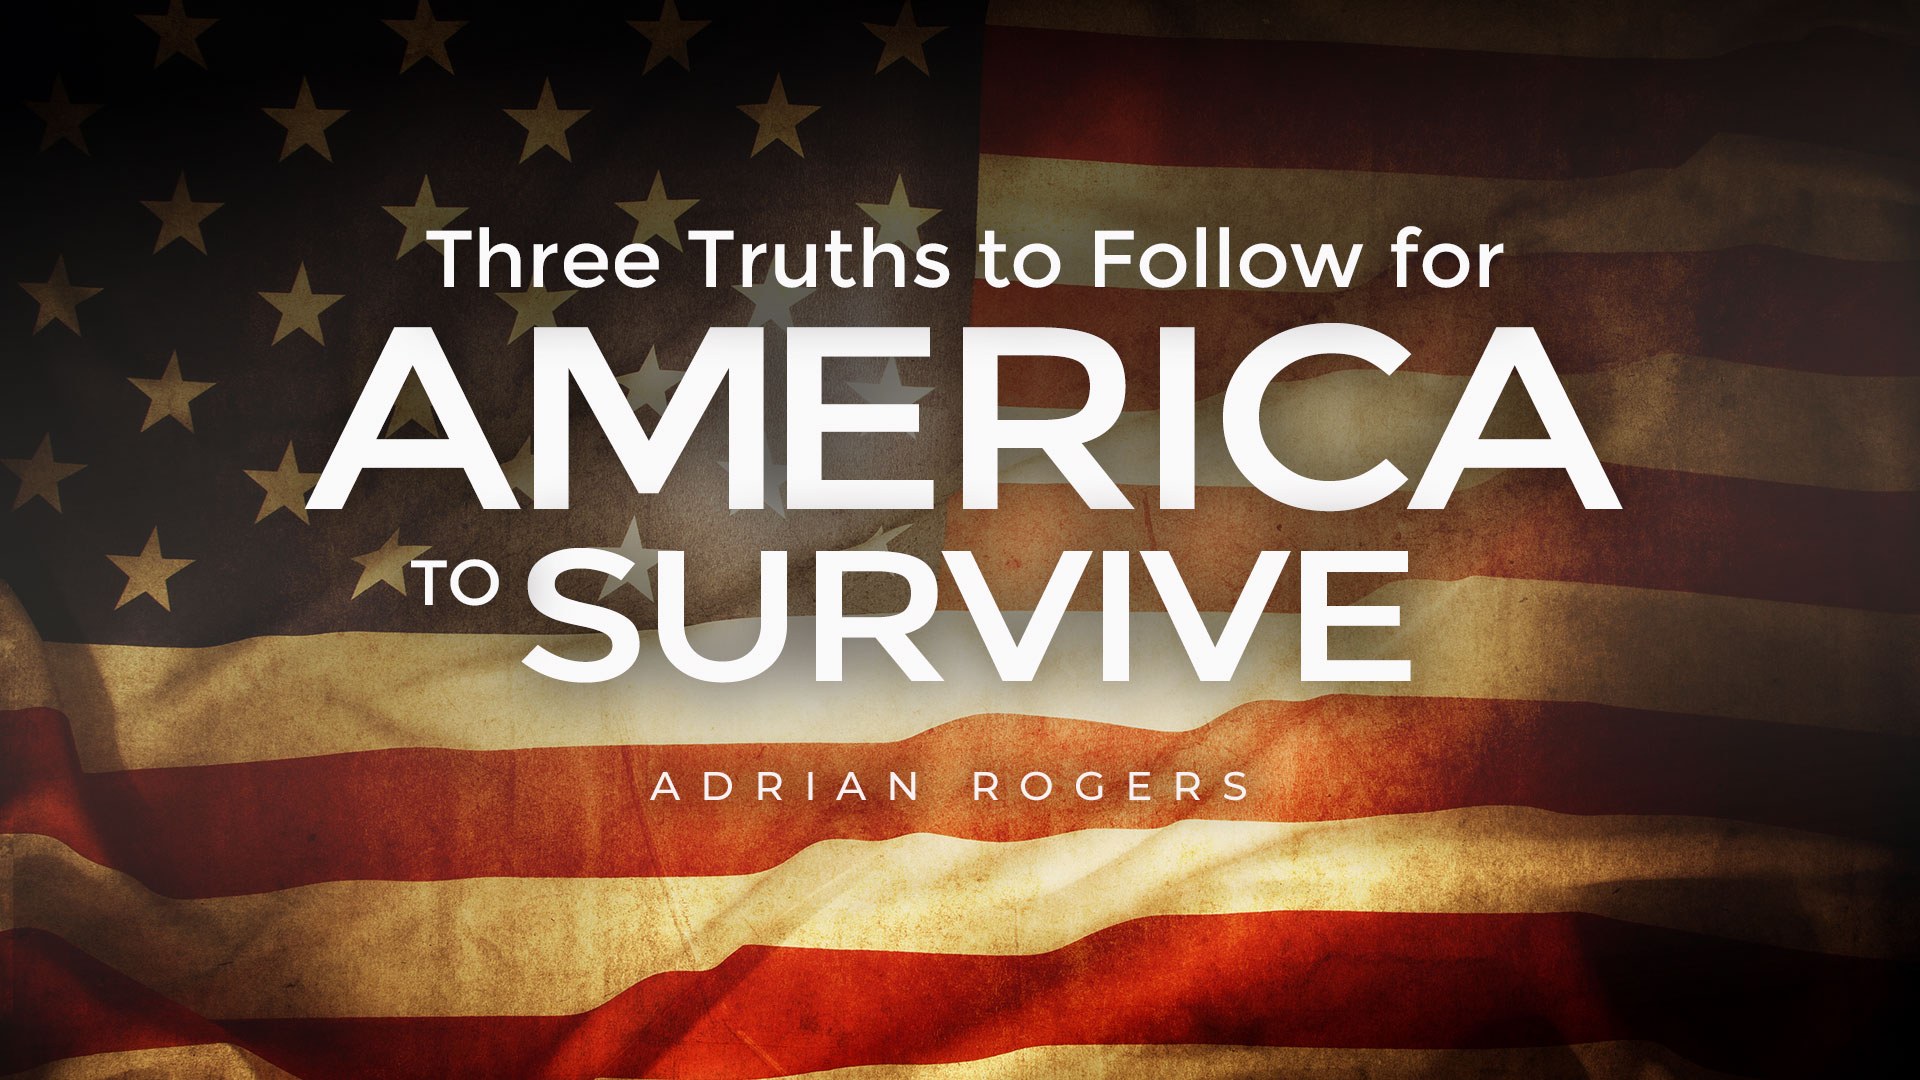 Three Truths to follow for America to Survive